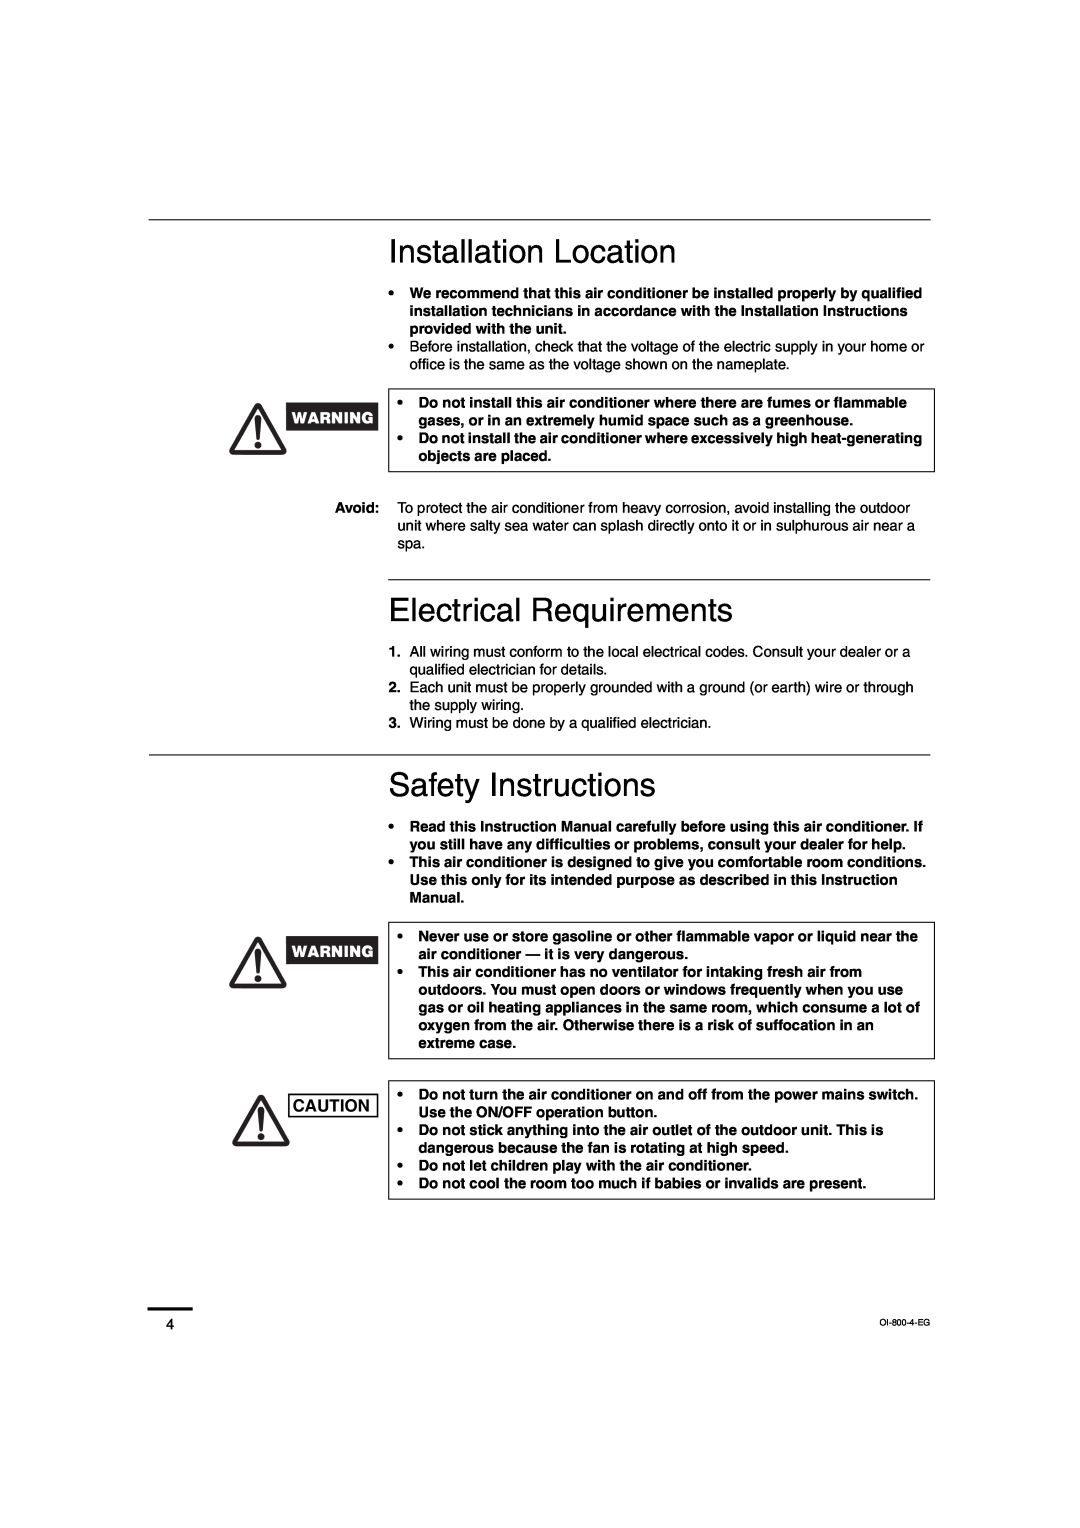 Sanyo CL1872, C2472, C1872, CL2472 service manual Installation Location, Electrical Requirements, Safety Instructions 